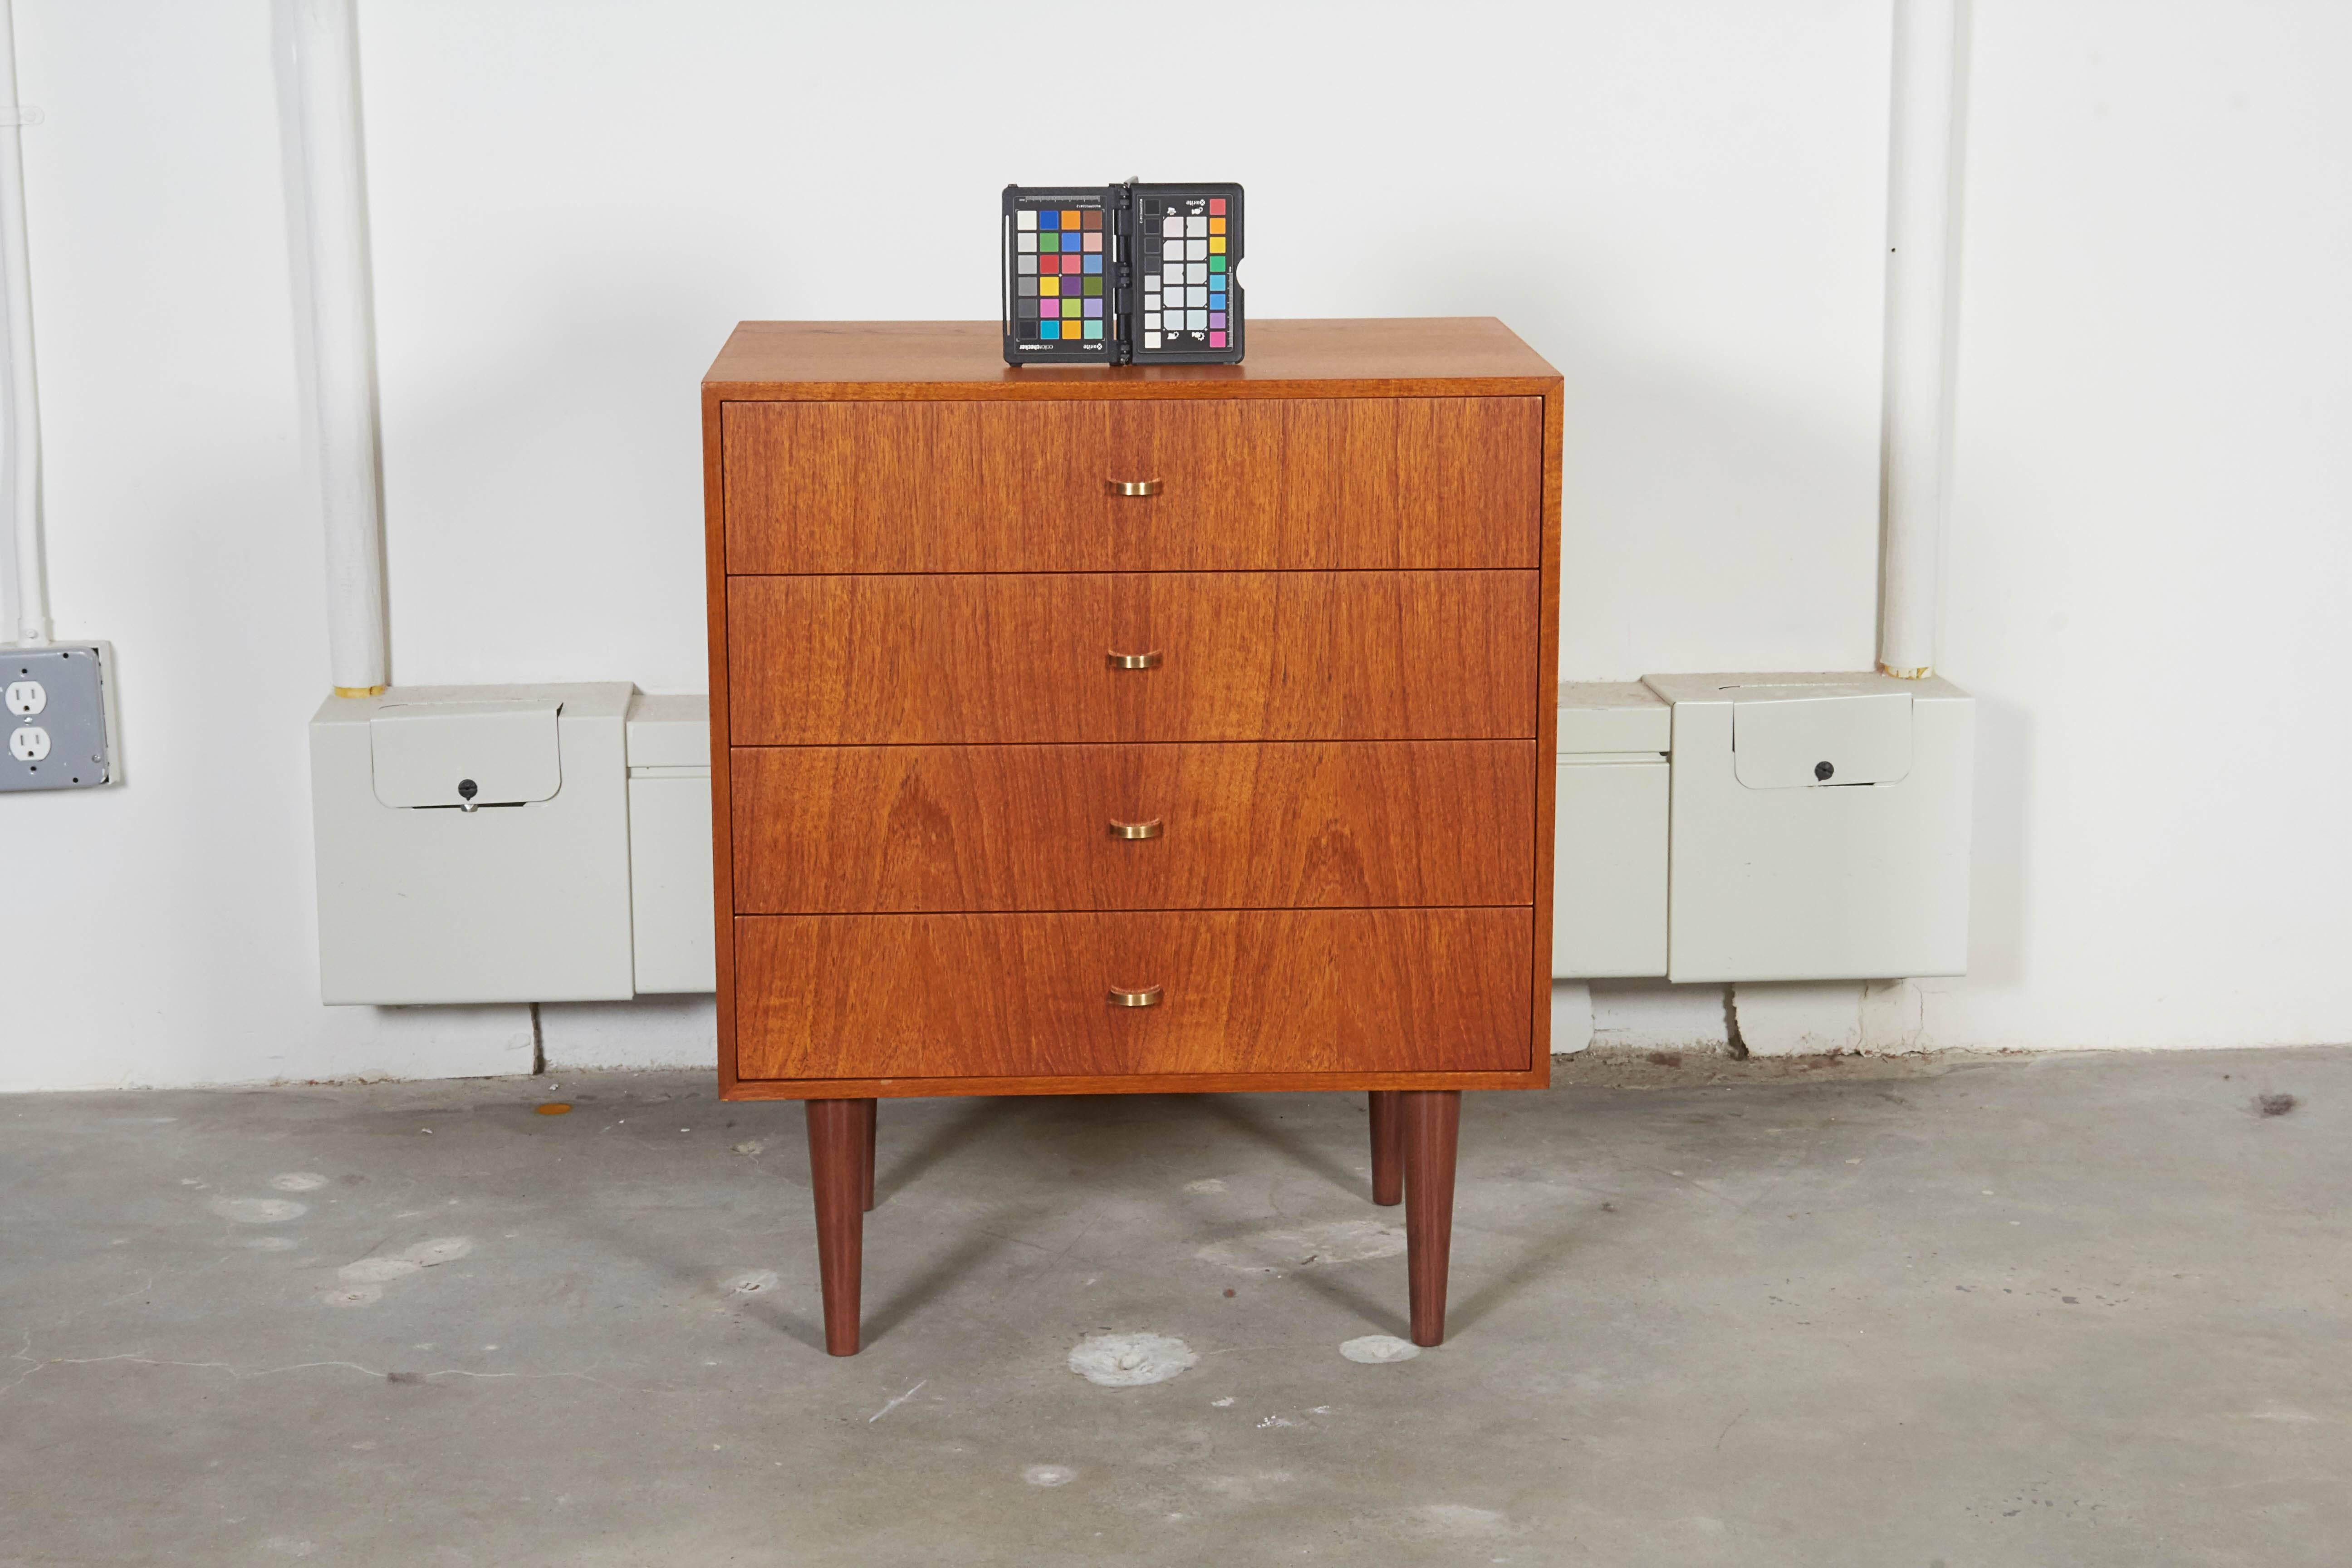 Vintage 1960s Teak Nightstands with Brass Pulls

This pair of mid century bedside tables are in excellent condition. Amazing amount of storage space. Ready for pick up, delivery, or shipping anywhere in the world. 